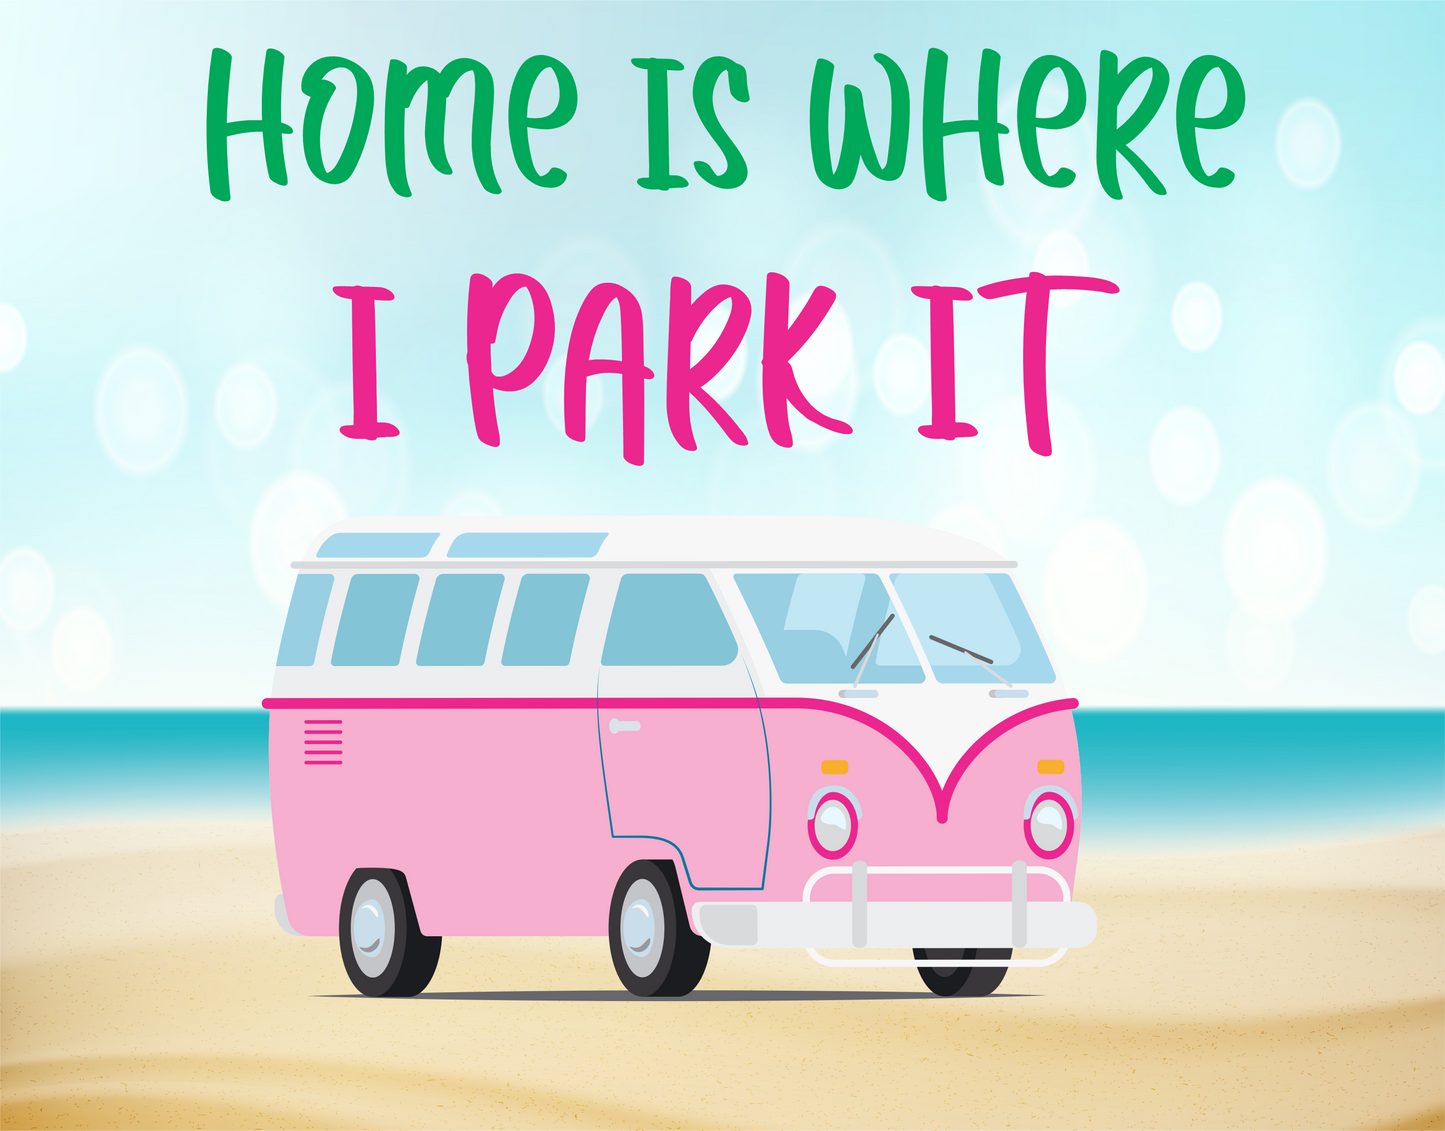 Home is where i park it pink van